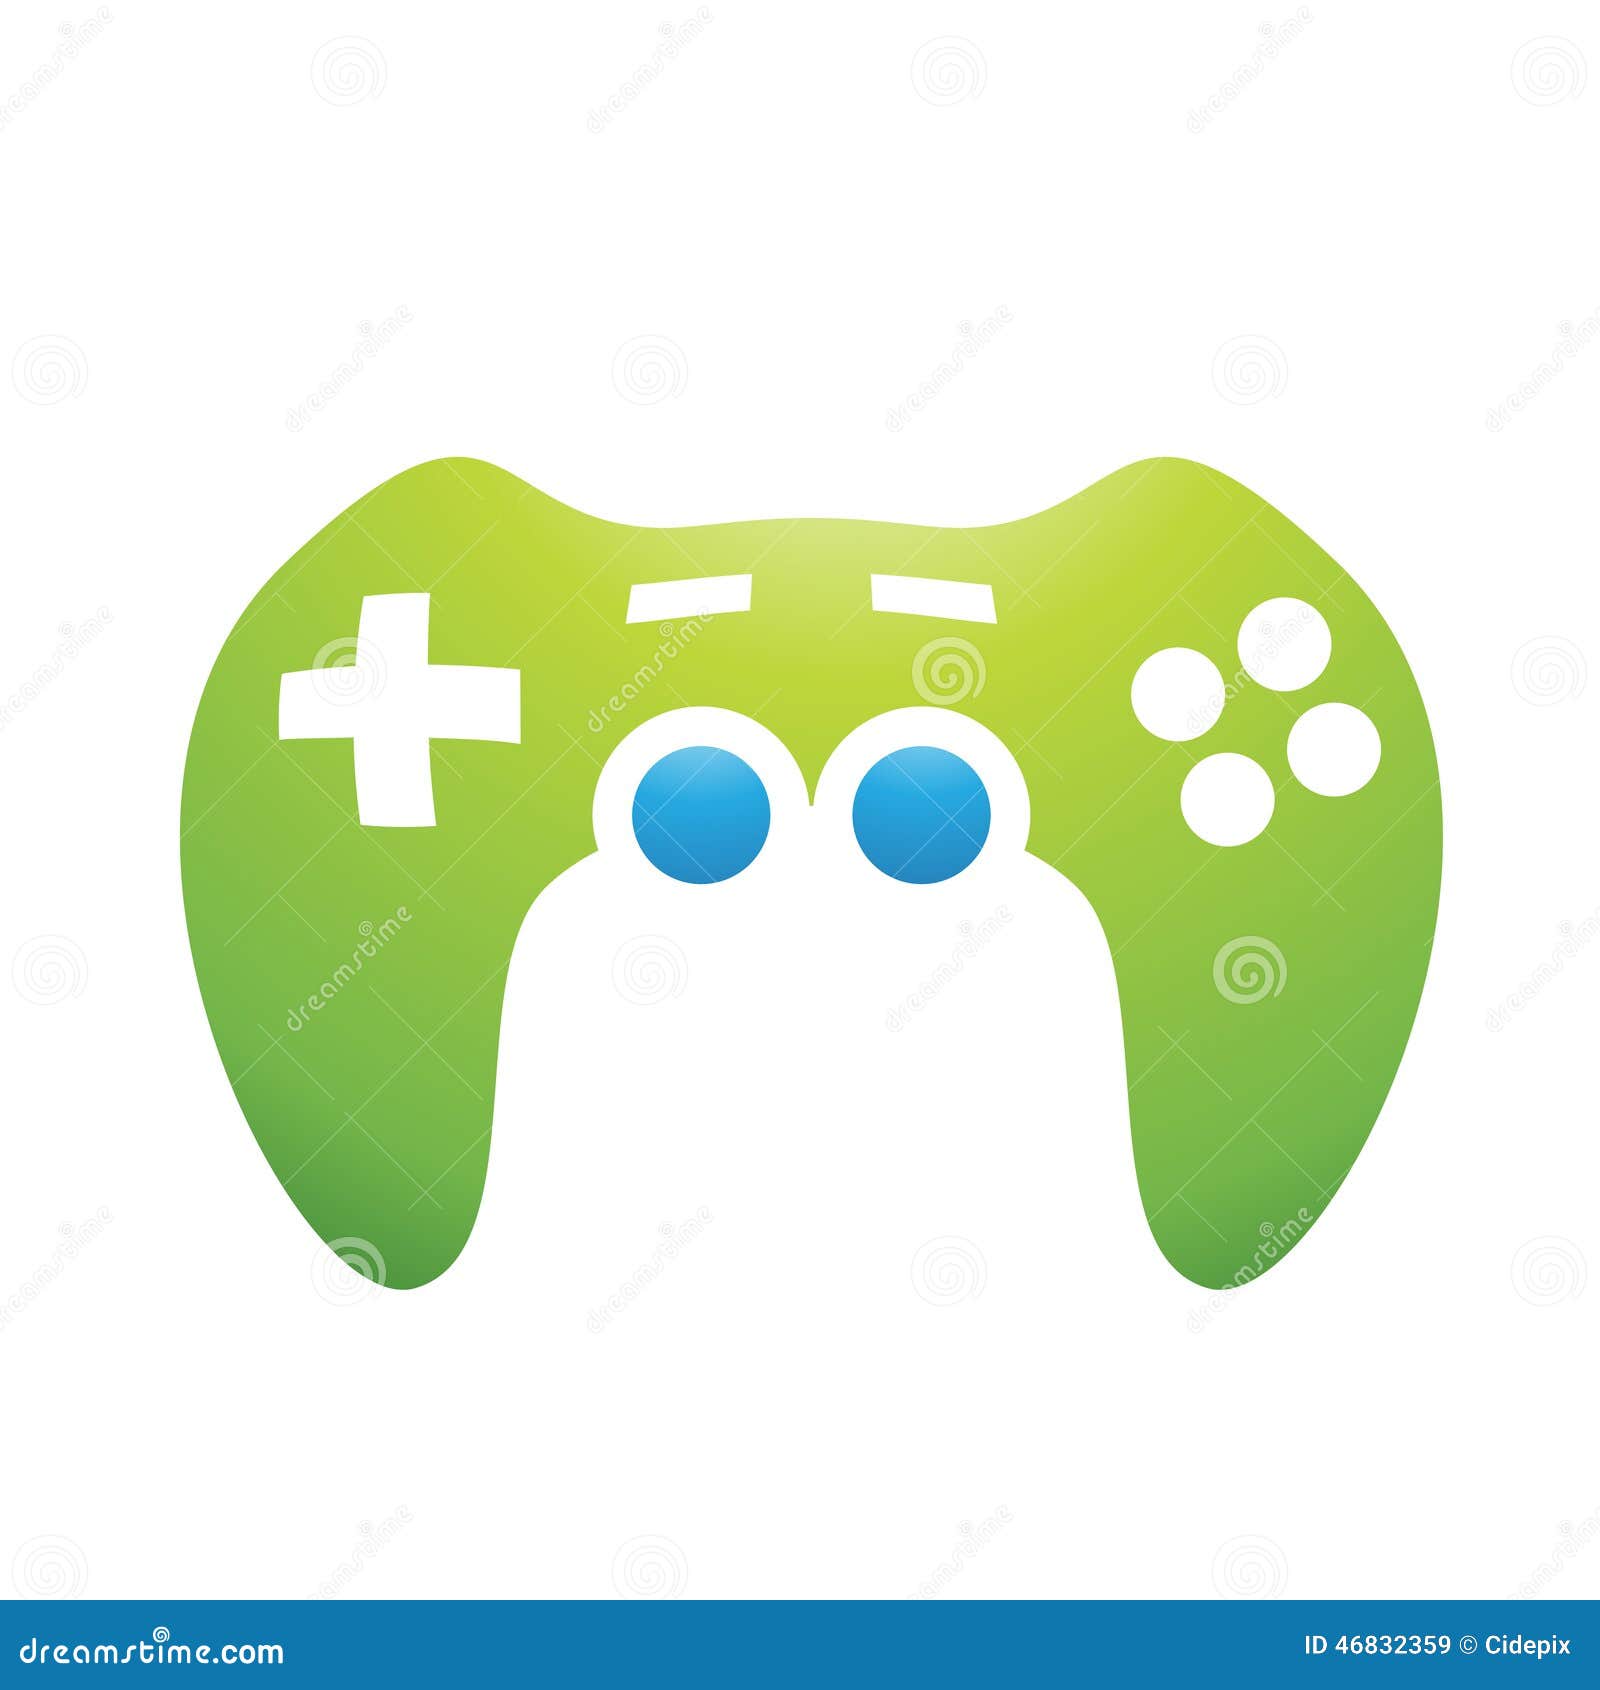 PC Accessories Game Controller Stock Vector - Illustration of isolated ...